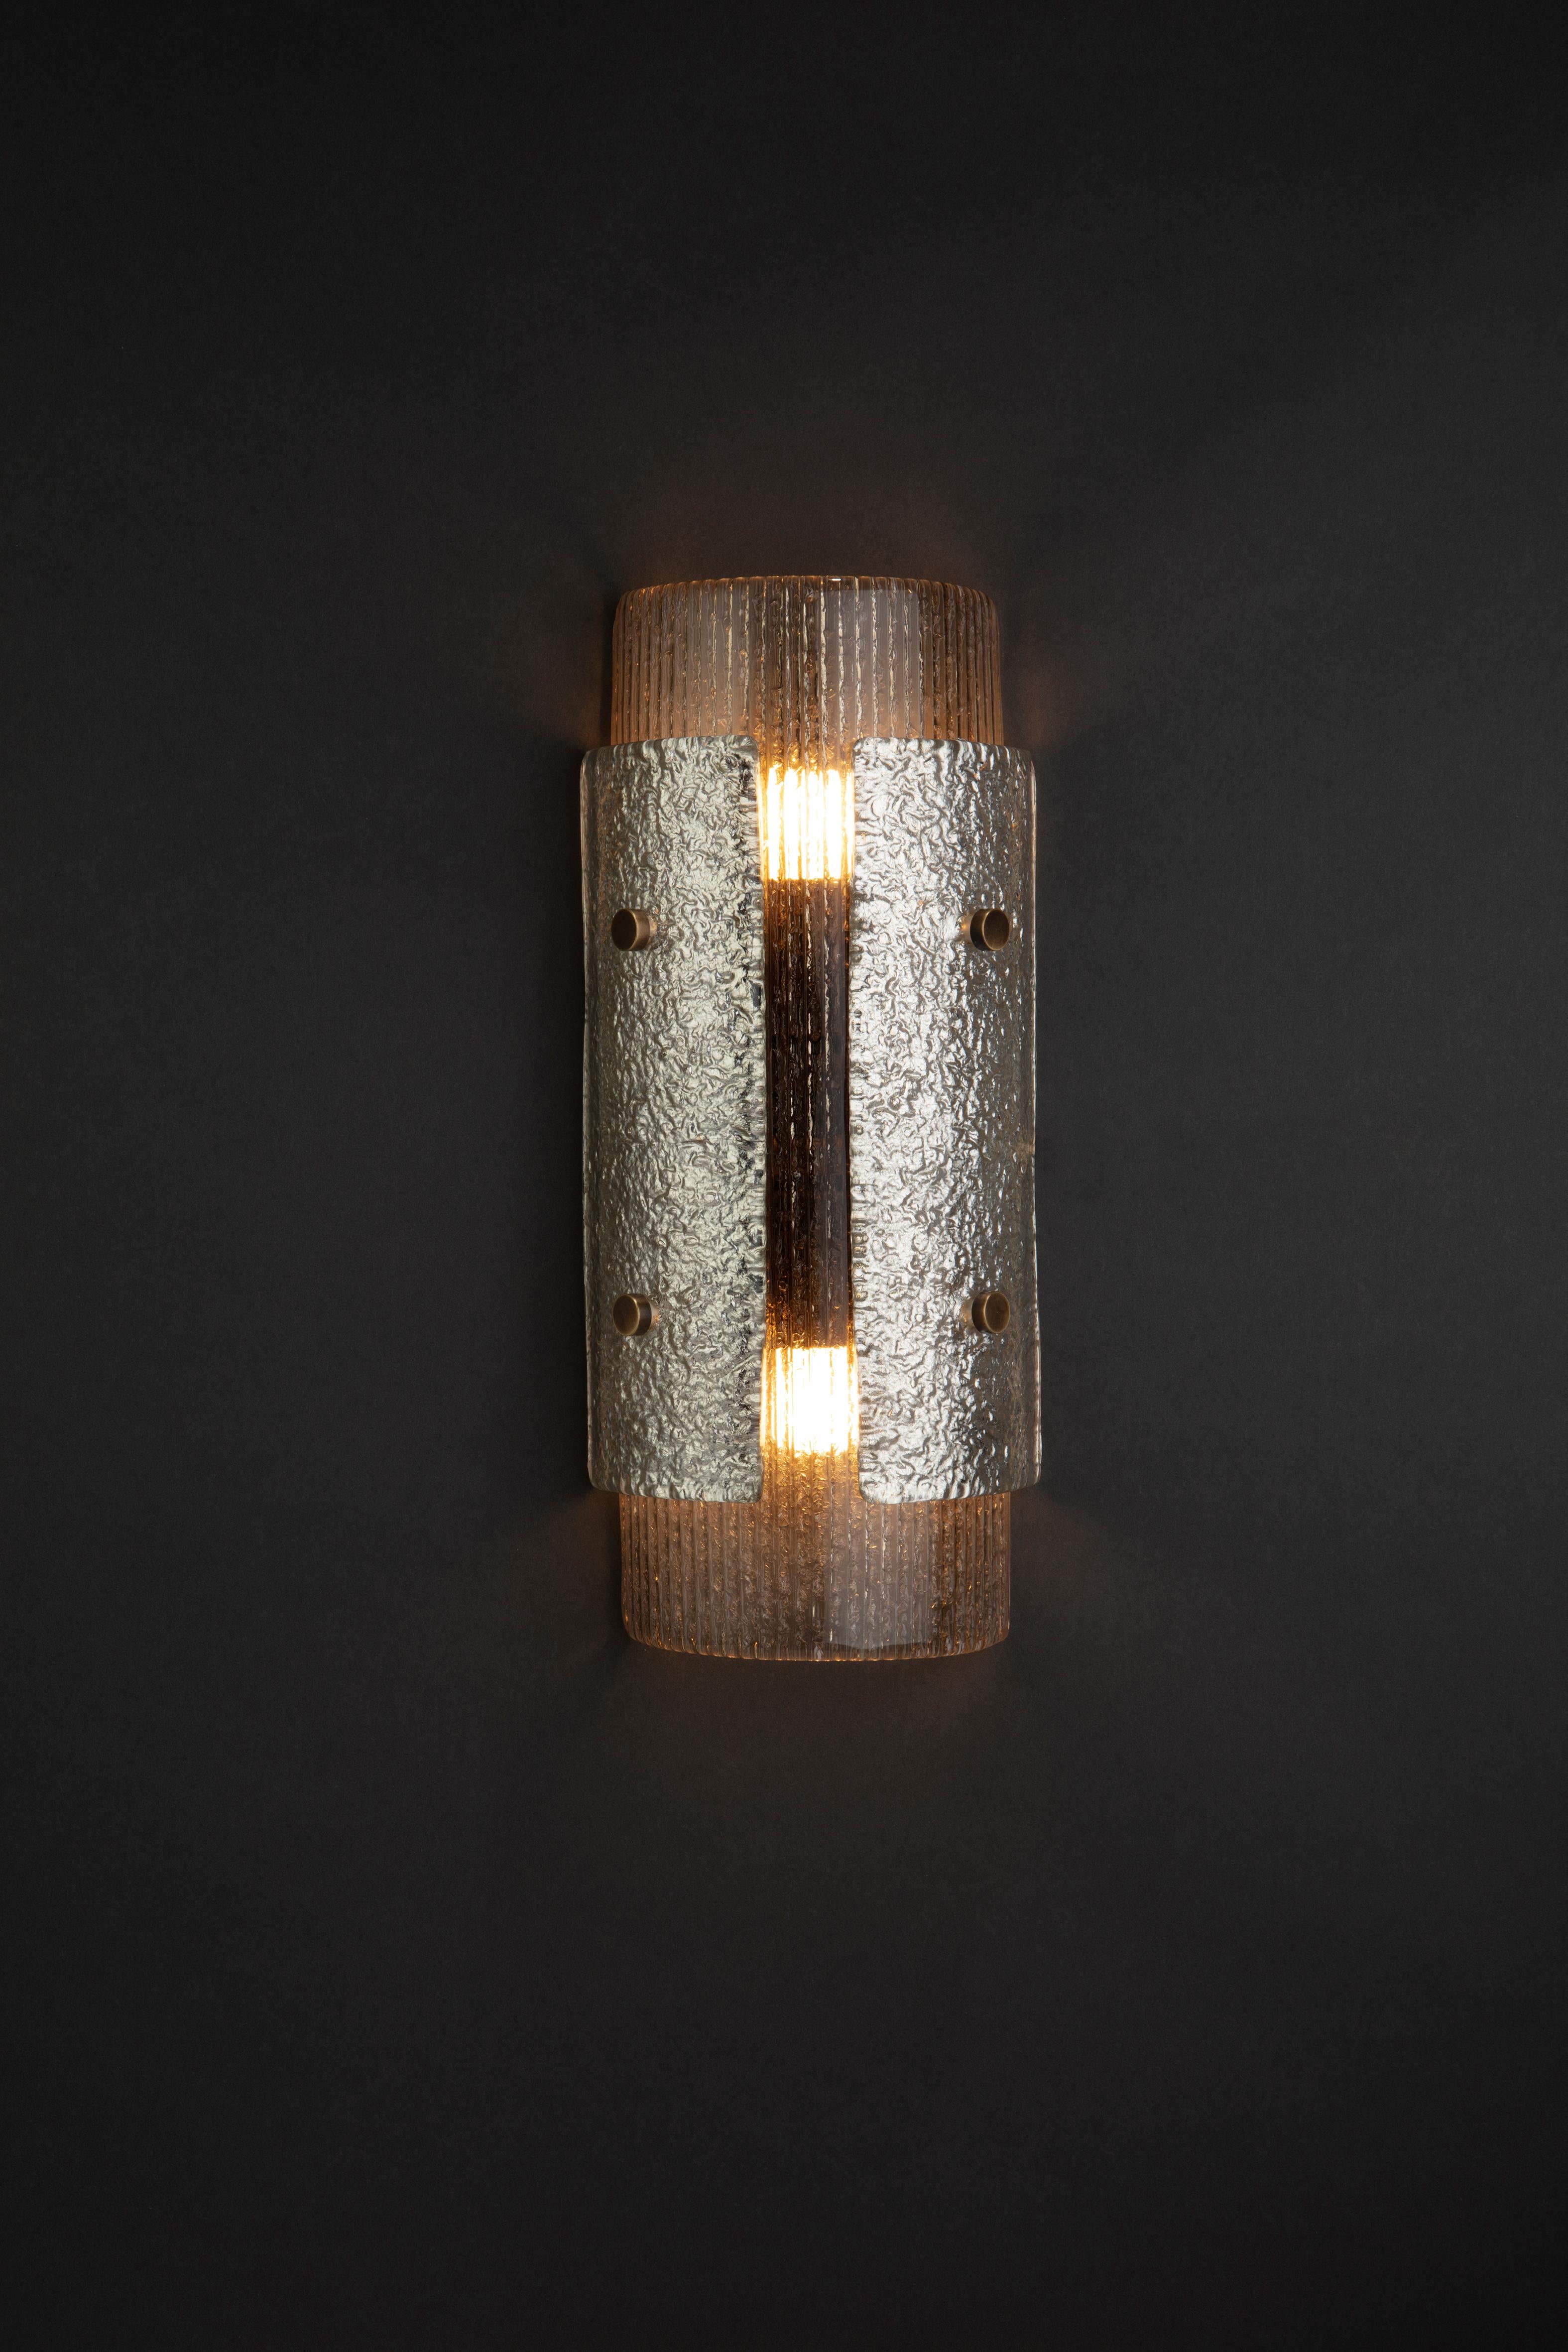 The mini laterali wall sconce is a smaller version of the laterali sconce and with different textures of glass. The body is ribbed which diffuses the light without alternating the colour. The two appliqués have silver gilding on the